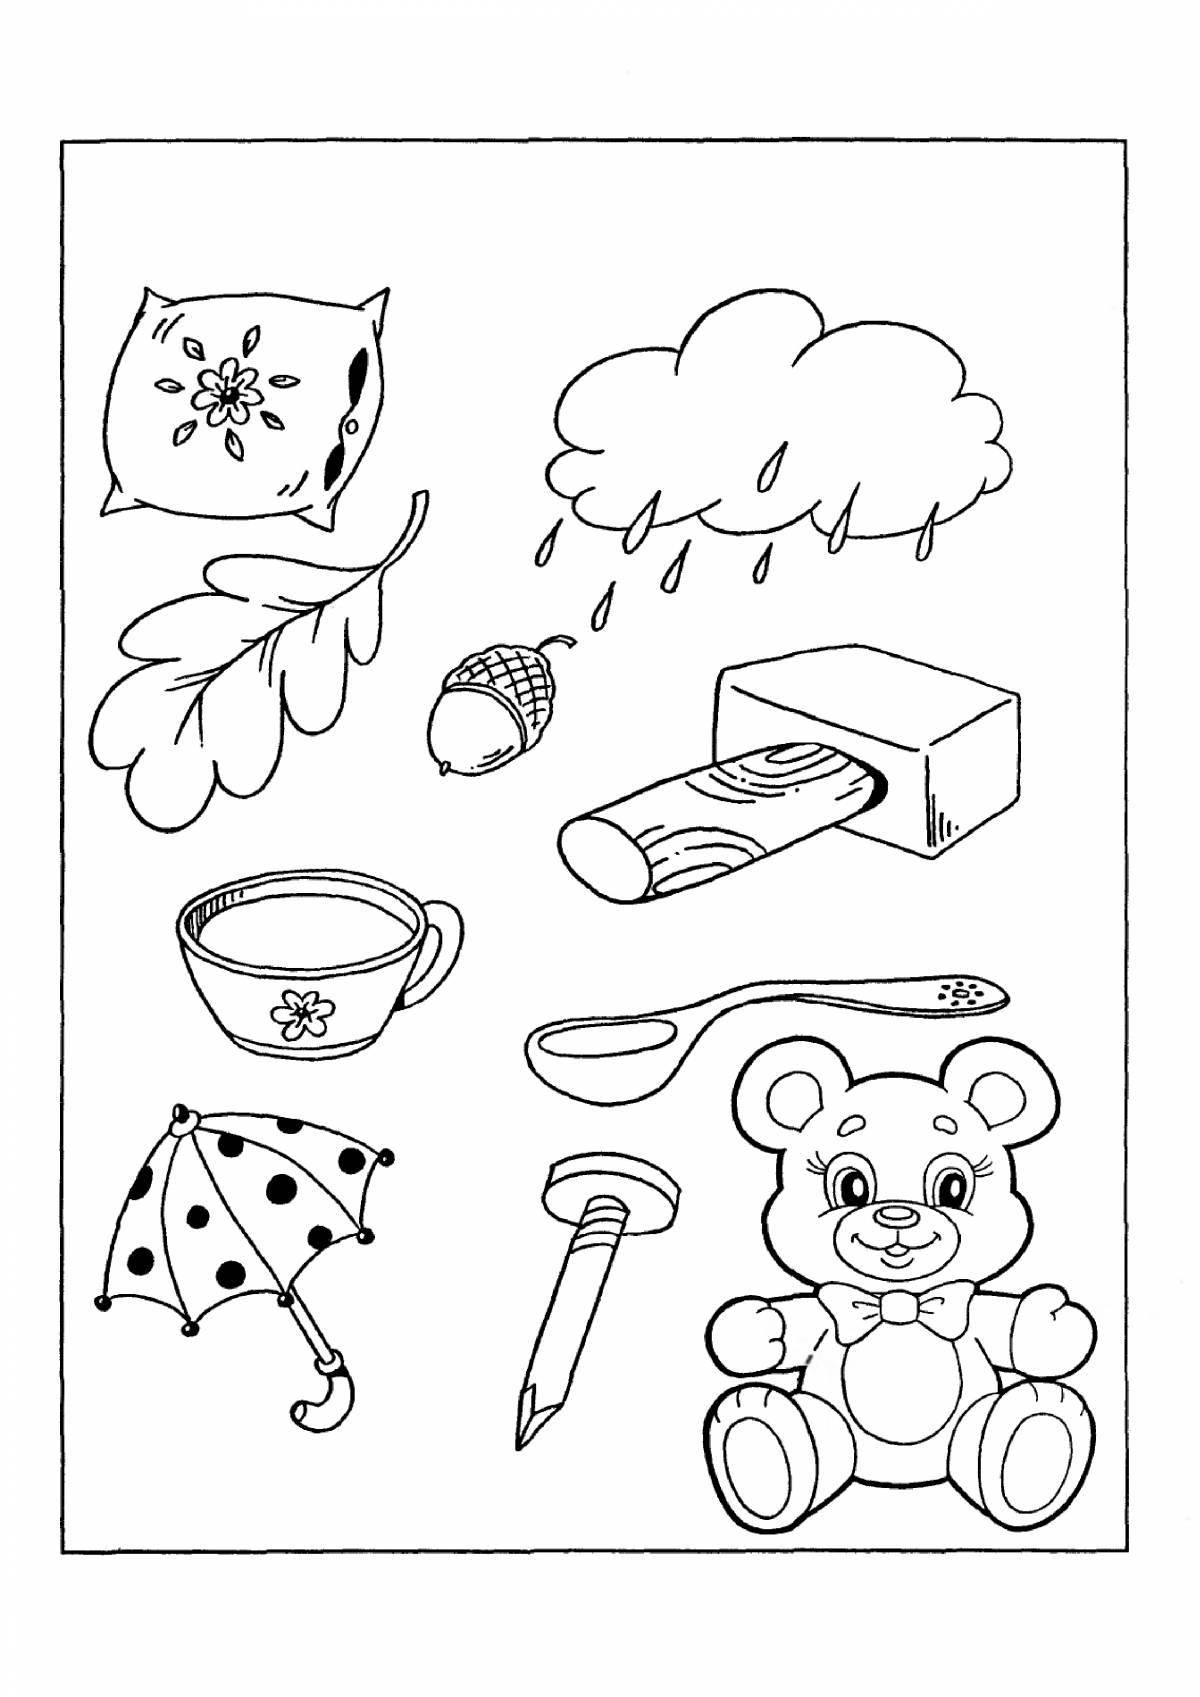 Fun coloring book for educational children 4-5 years old